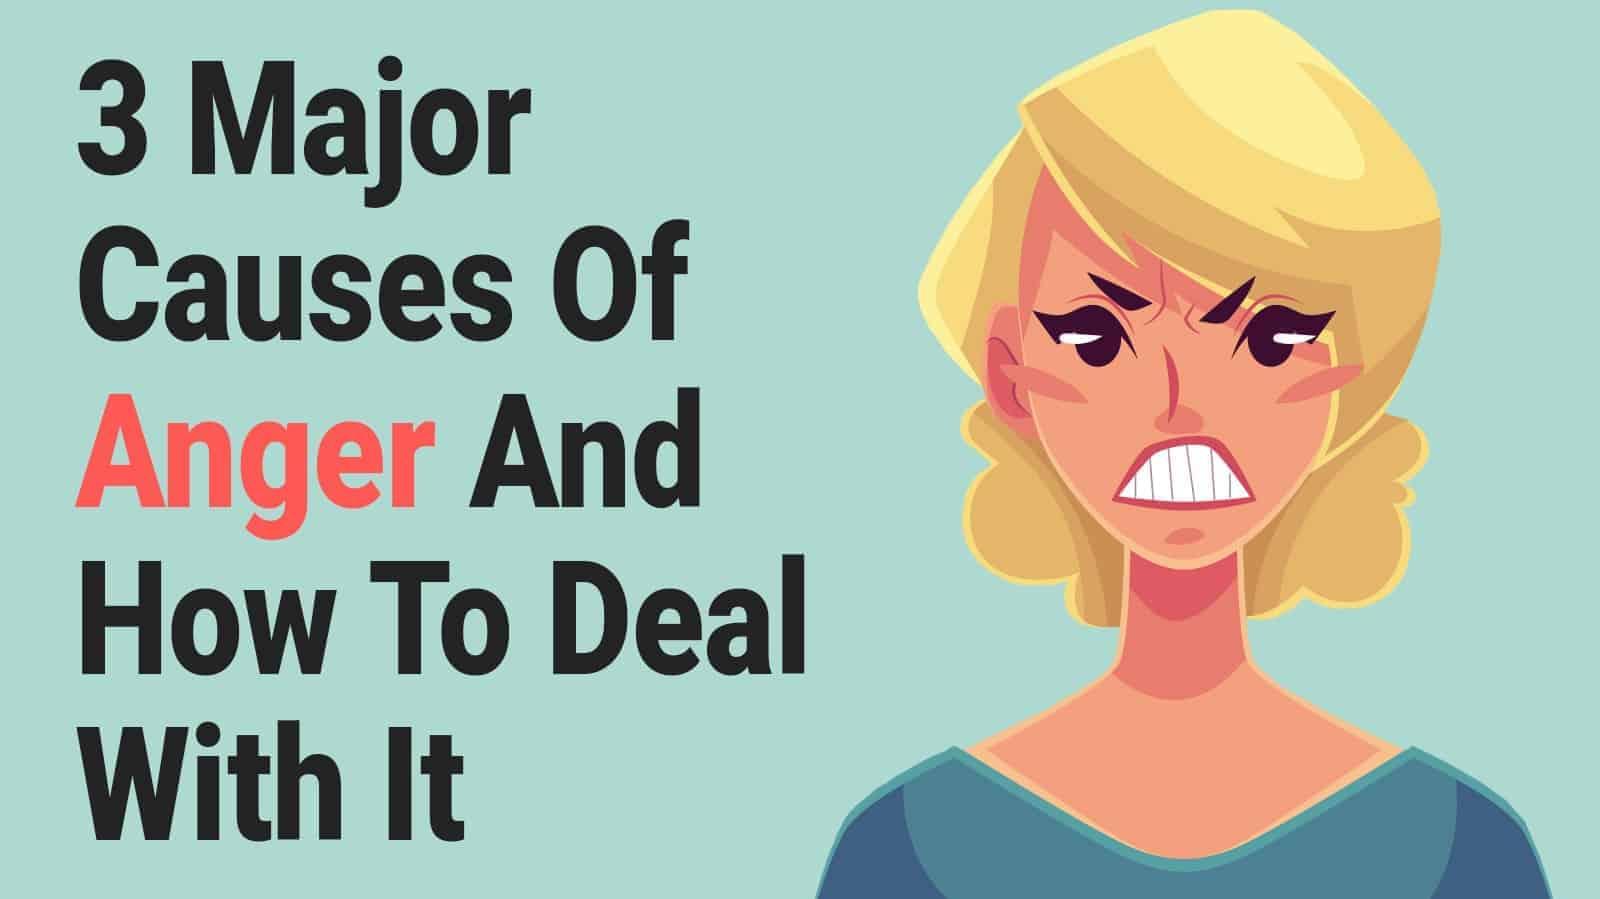 Major Causes Of Anger And Deal With It